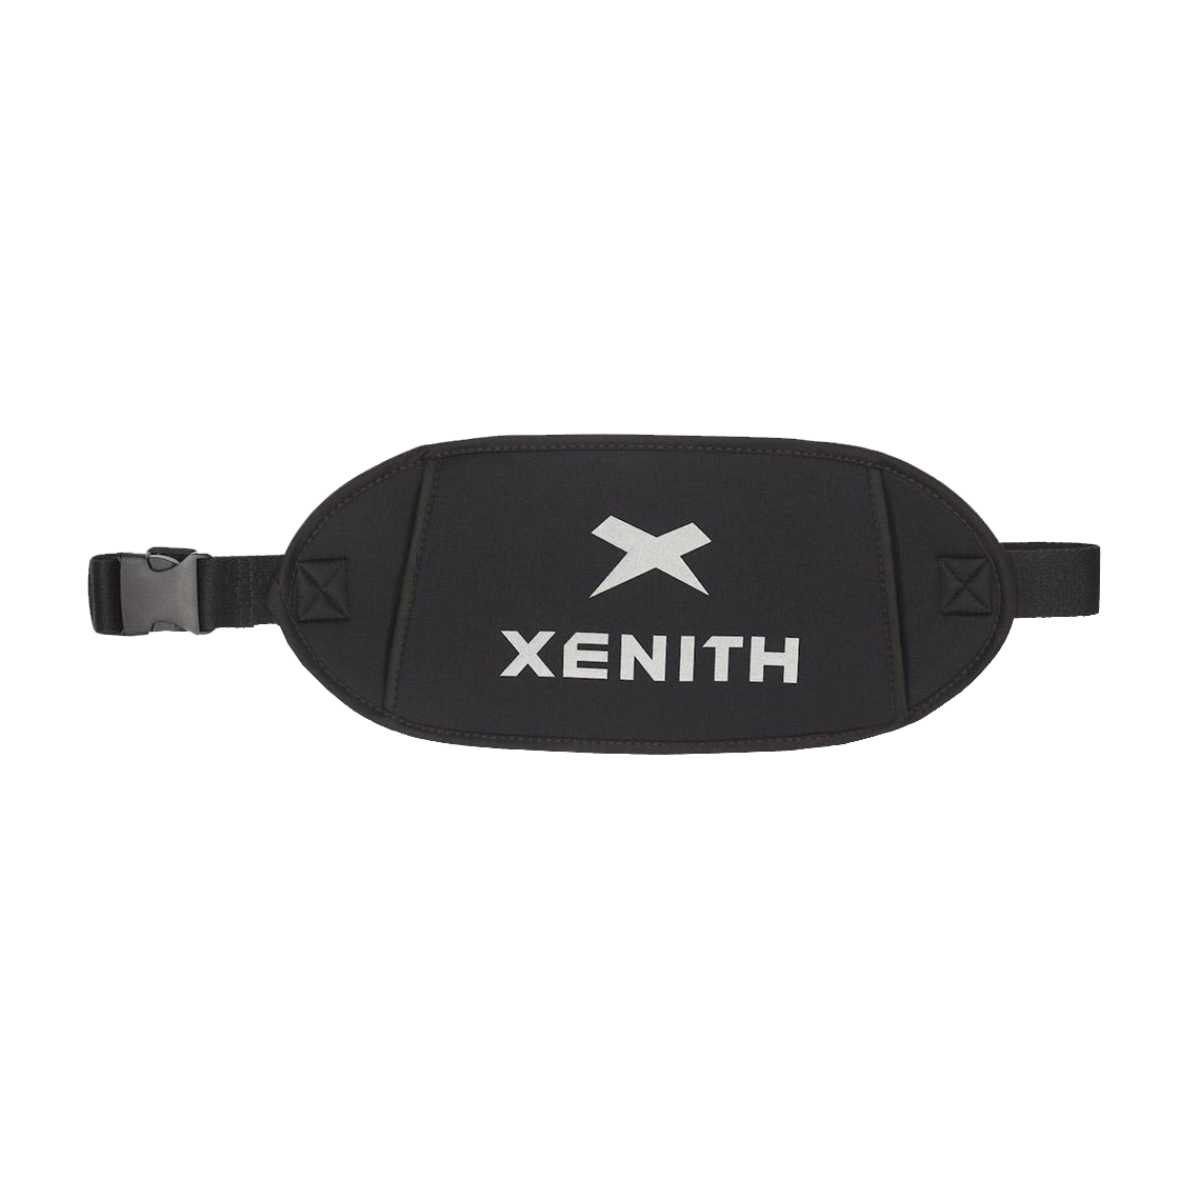 Black Xenith hand warmer with white logo.